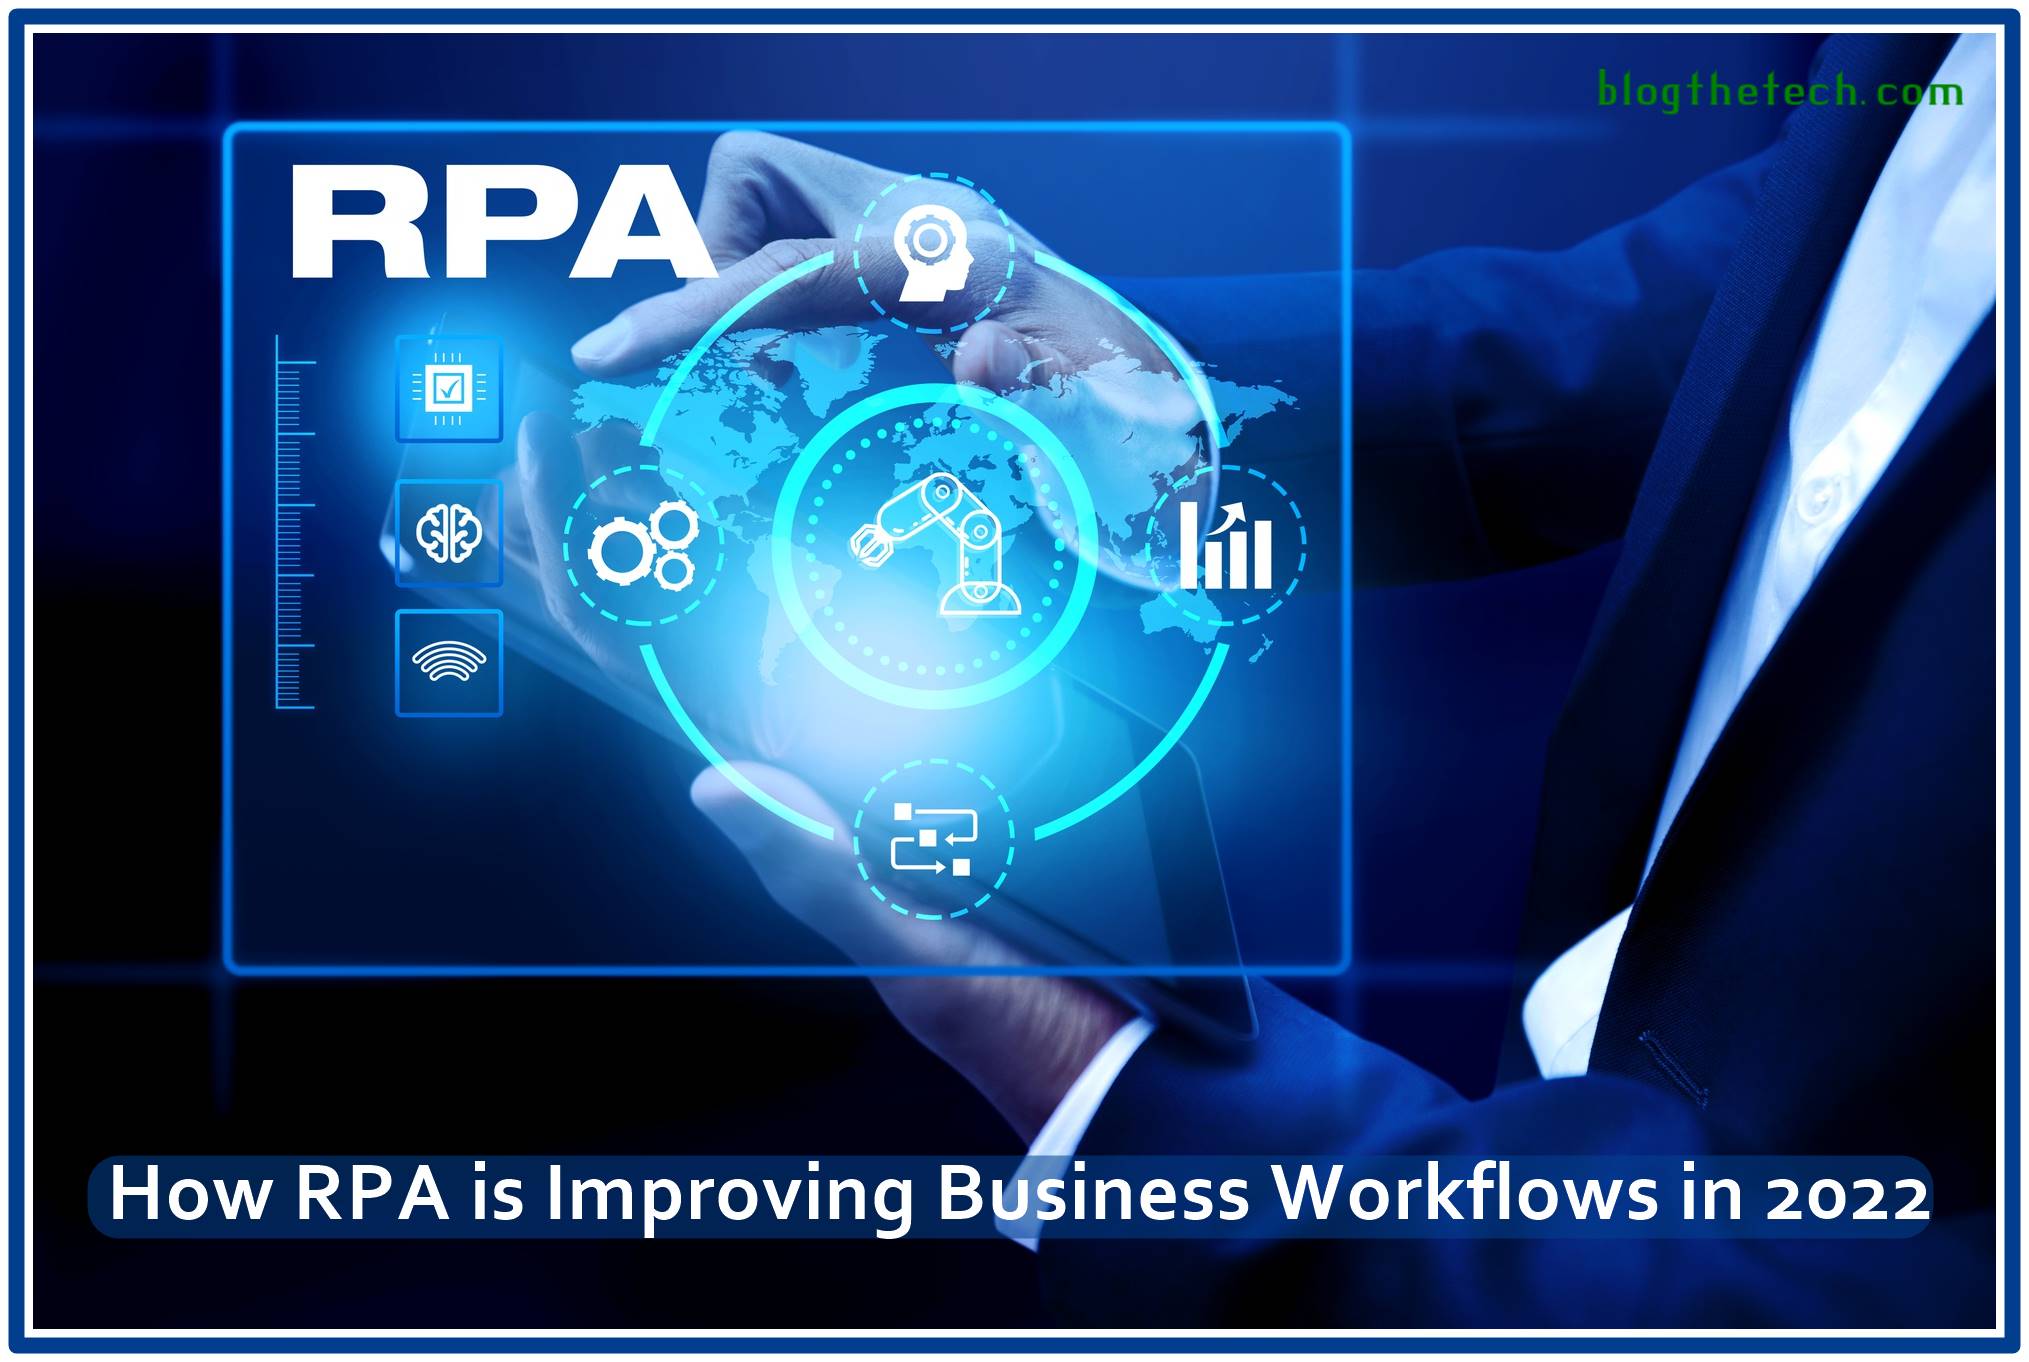 How RPA is Improving Business Workflows in 2022